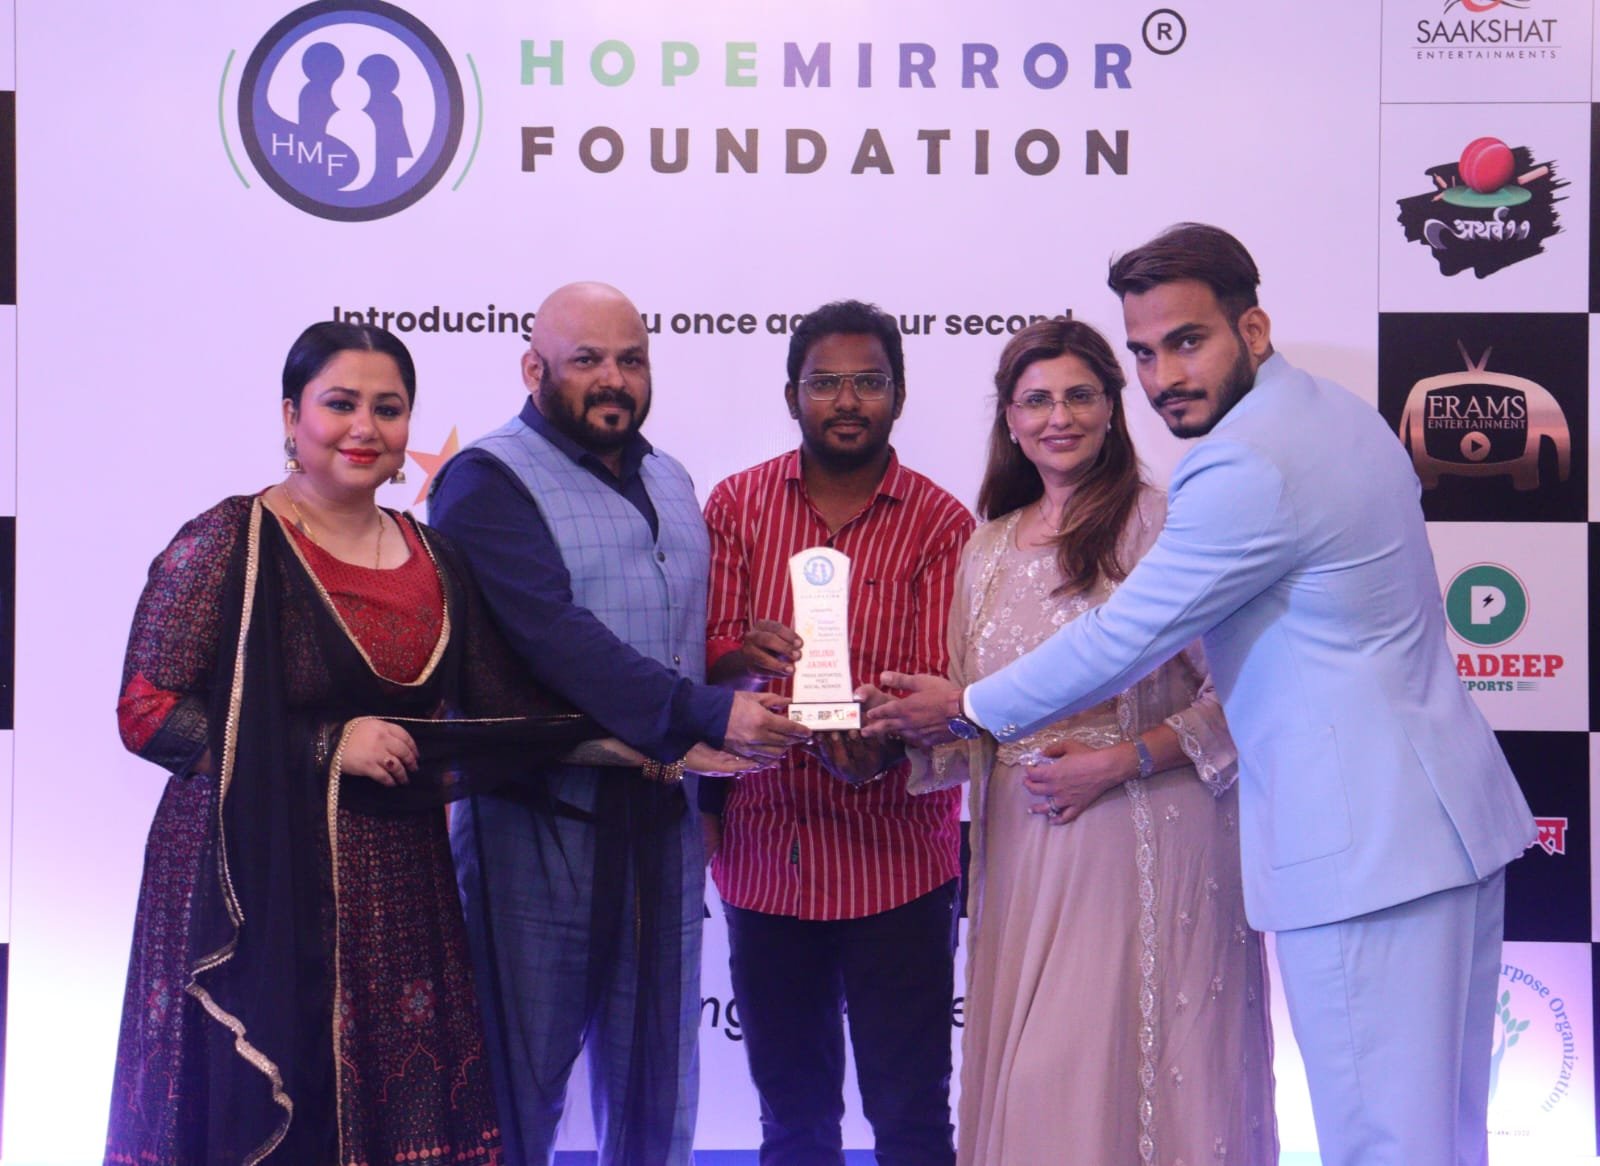 HopeMirror foundation organised the 2nd Golden humanity award 2022 on 5th December. Miss. Eram Faridi, Mr. Avchit Raut, Dr. Parin Somani, Mr. Dilshad Khan, Mrs. Sakshi Sagvekar, Mrs. Priyanka Aher Jadhav, Mr. Zafar Pirzada, Mr. Ramkumar Paal ,Mr. Sandip Patil, were the chief guest of the award ceremony. The event was supported by Erams Entertainment. Awardees from PAN India got honoured in the event at Grand Peninsula Hotel, Andheri East.